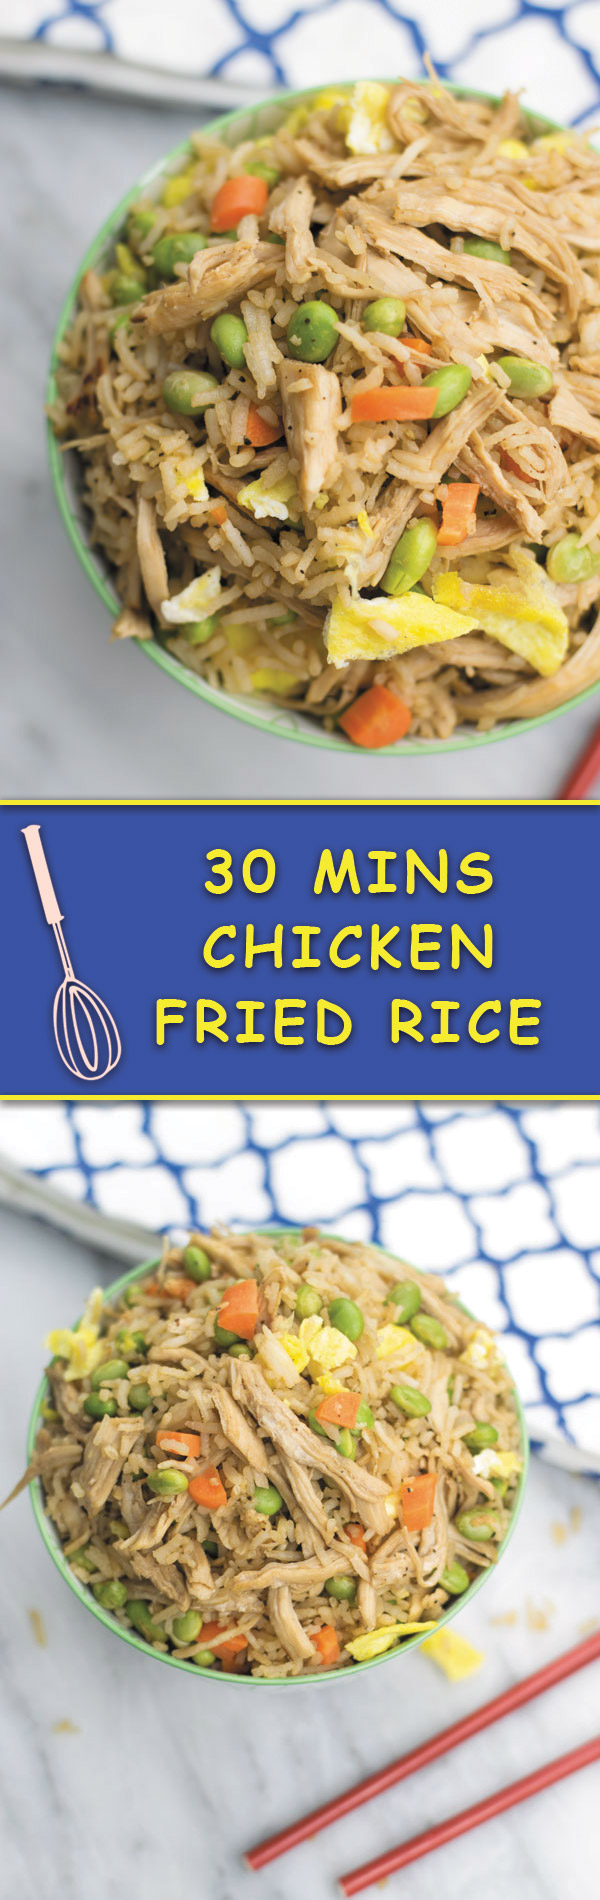 This super delicious CHICKEN FRIED RICE takes 30 mins start to finish, packed with marinated shredded chciken and tons of veggies, this is one meal that will leave you satisfied!